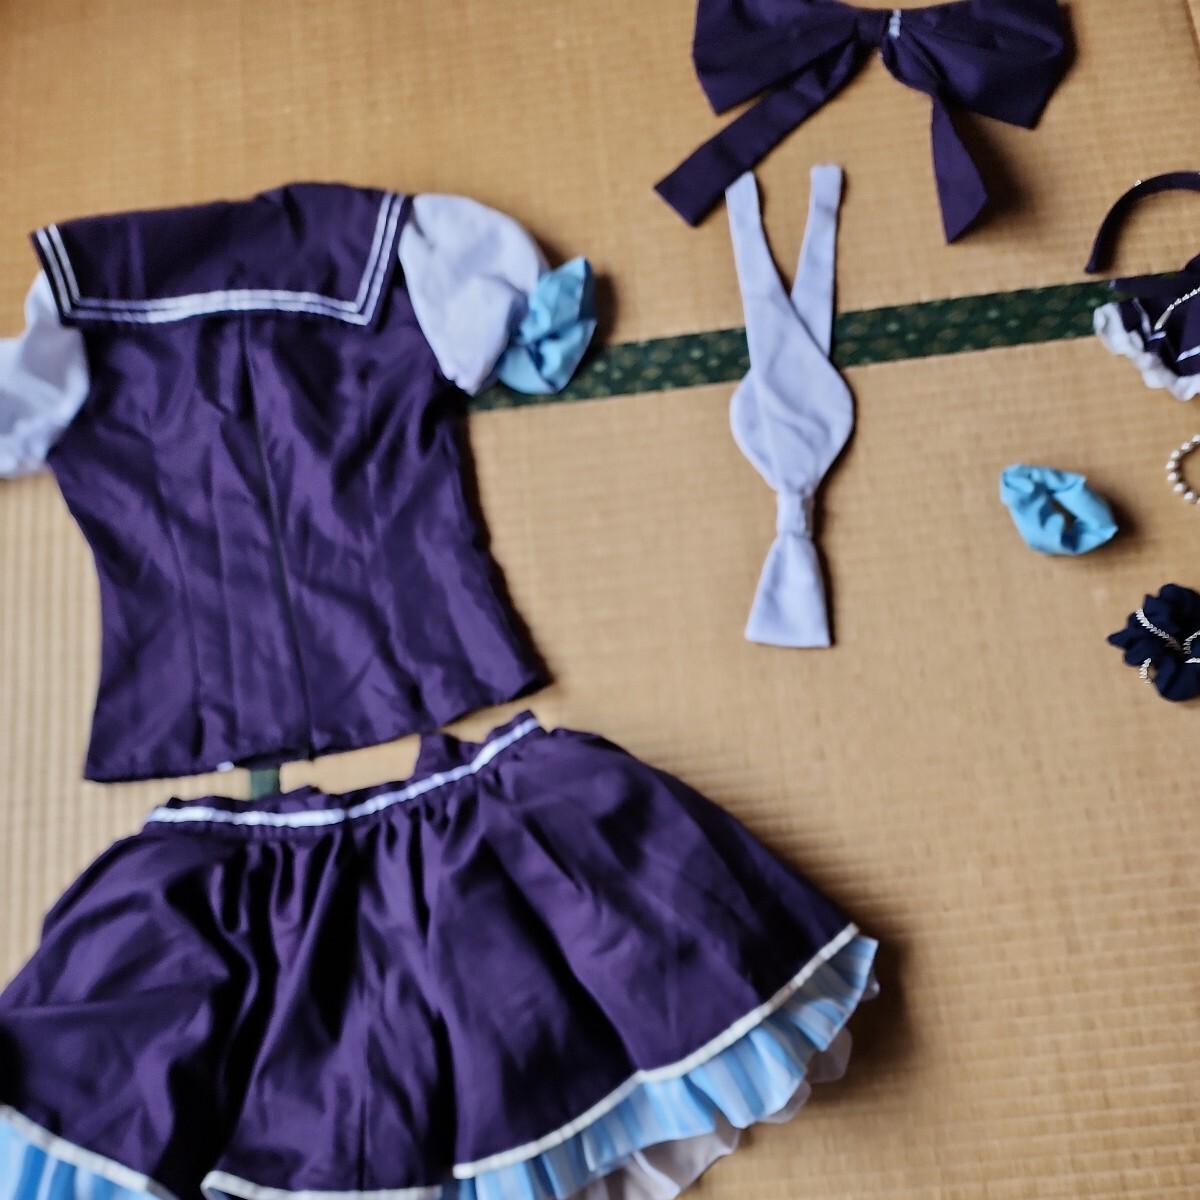  Rav Live height slope ... Pirates compilation .. front S size one jpy start cosplay .. purple . white . light blue . gray skirt . dressing up 